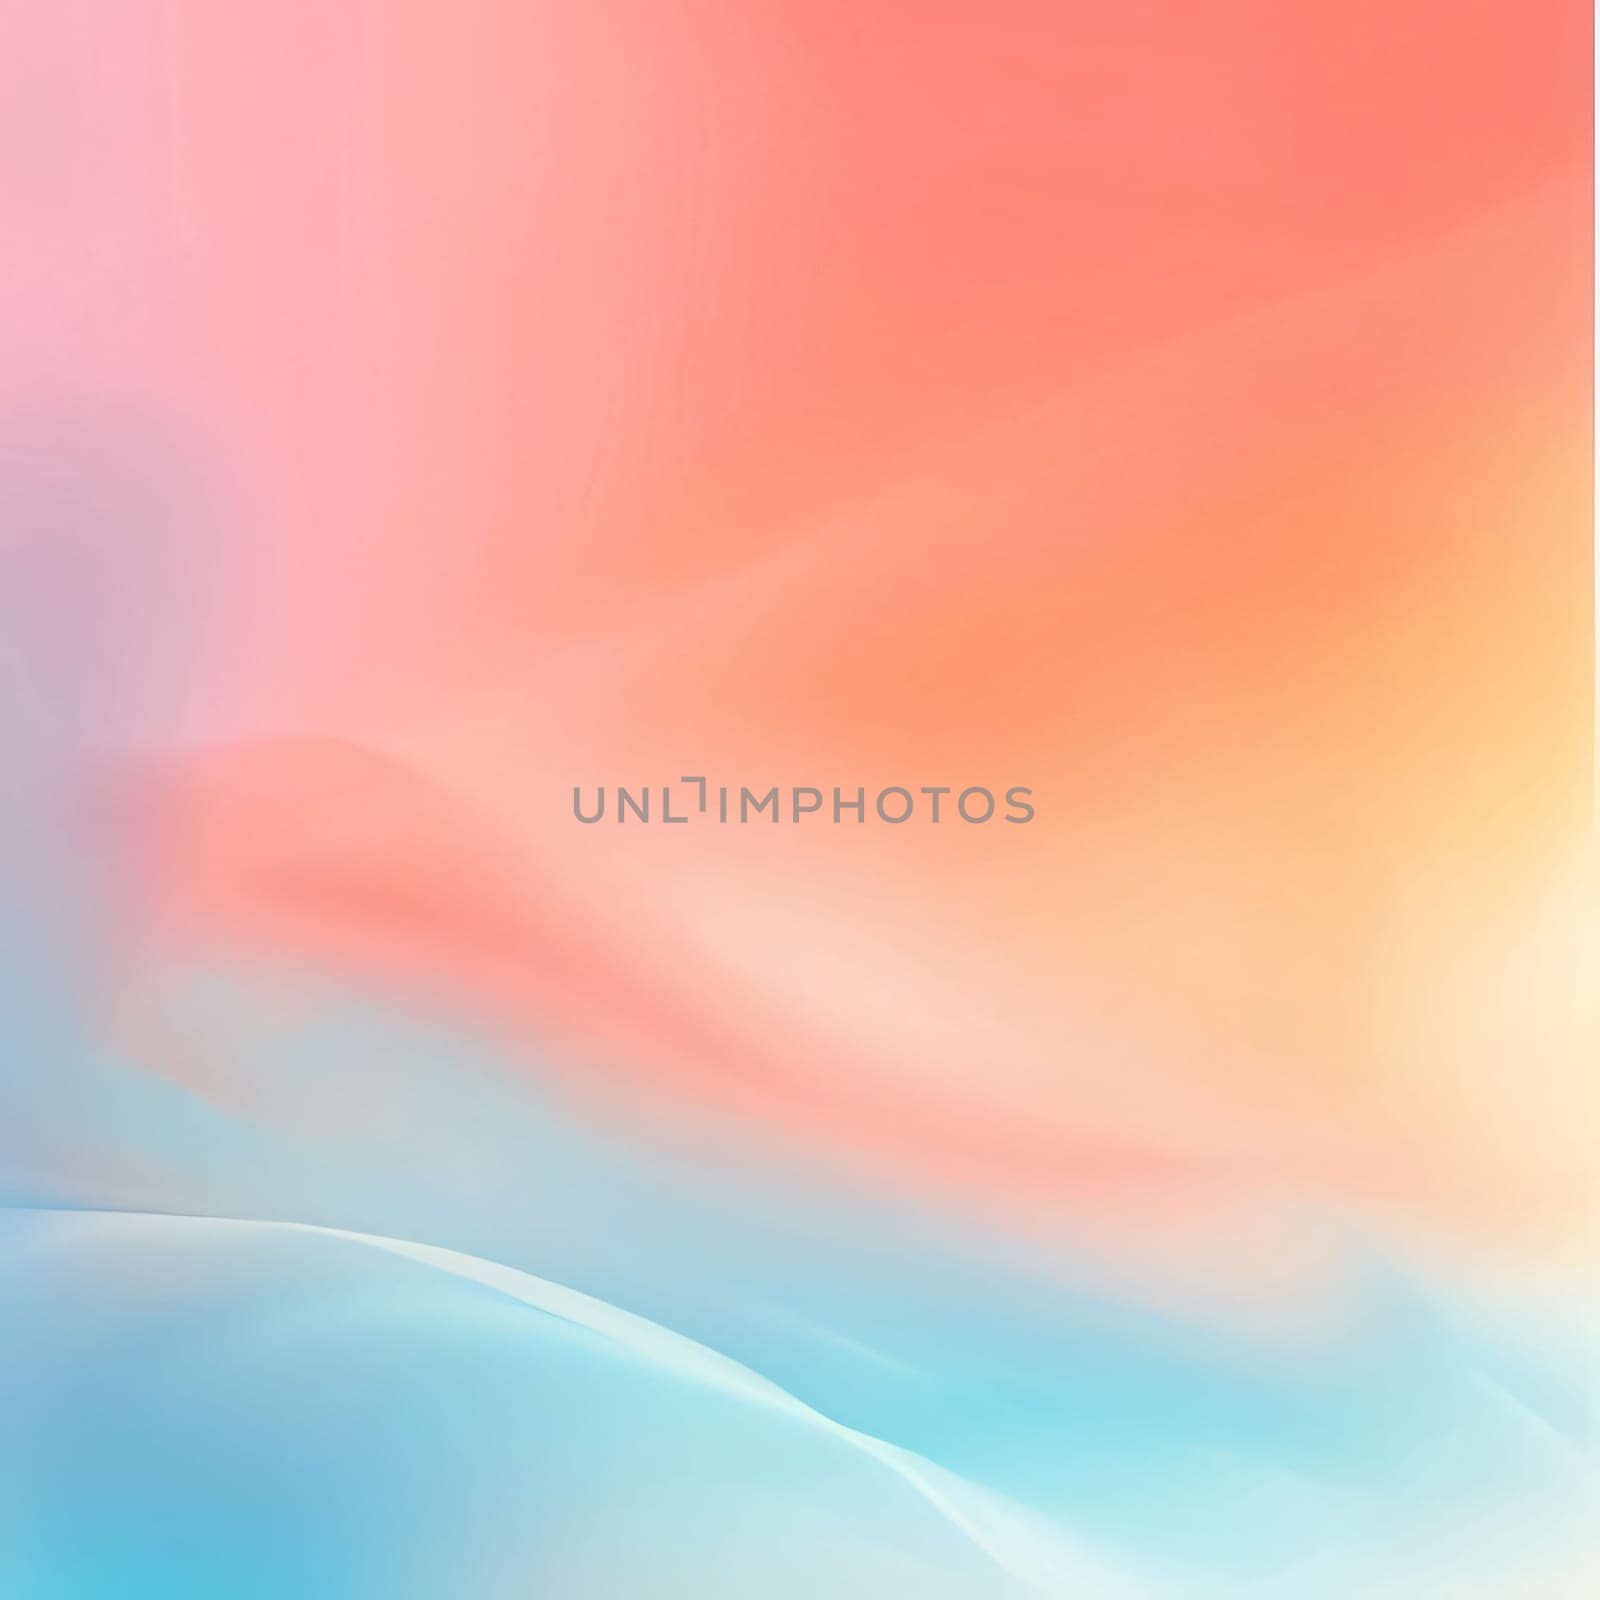 Abstract background design: abstract background with smooth lines in pink, blue and yellow colors